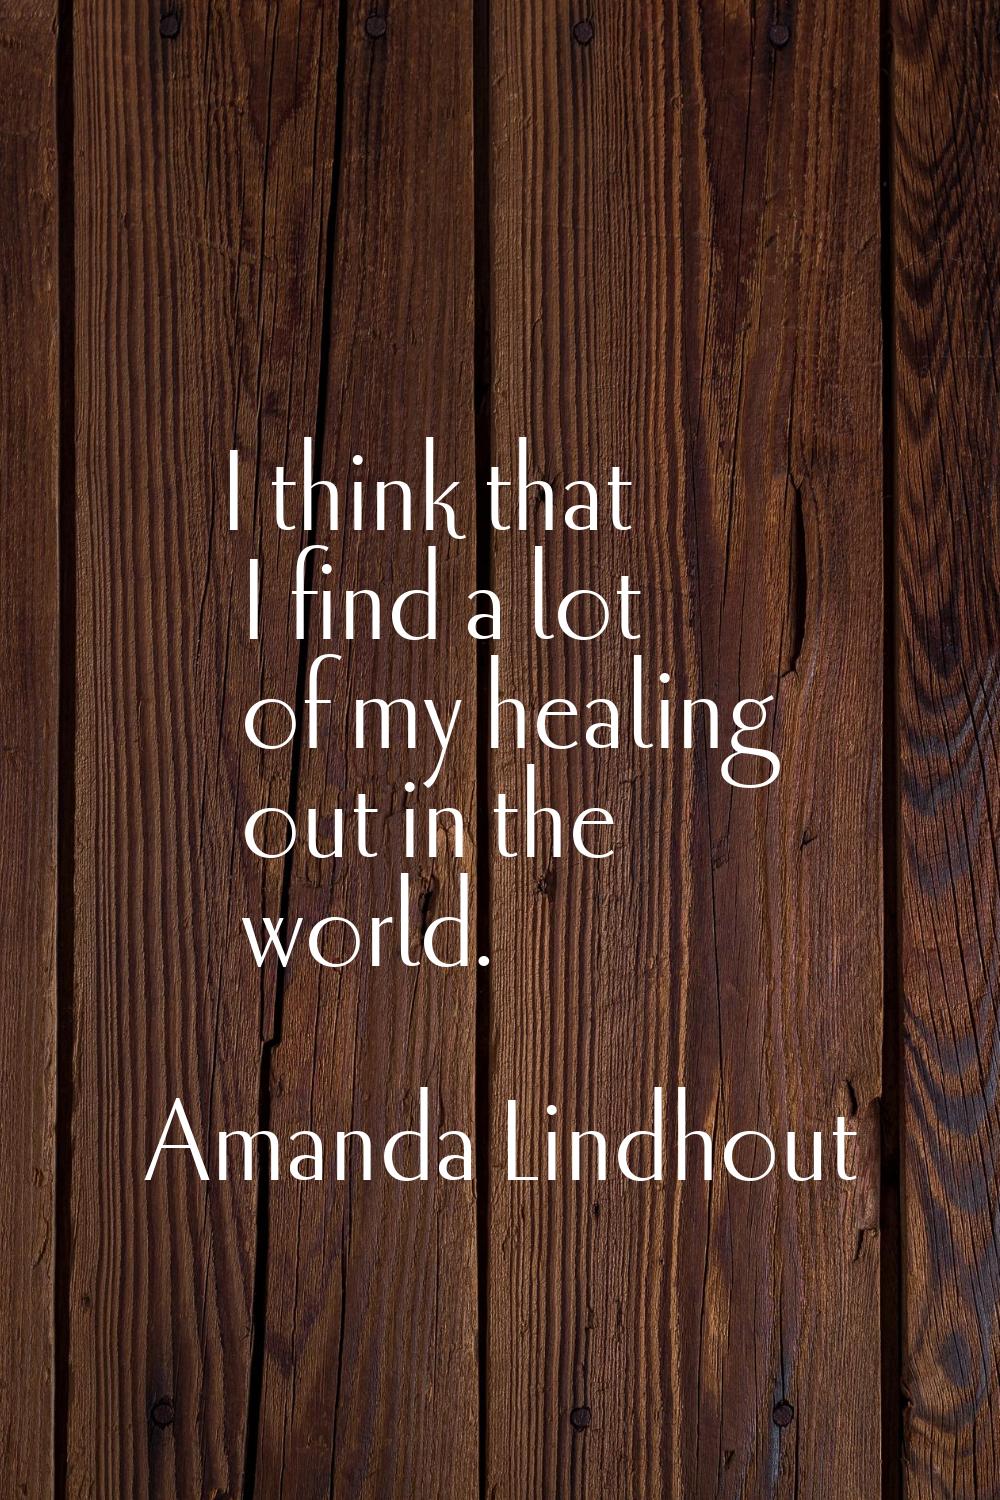 I think that I find a lot of my healing out in the world.